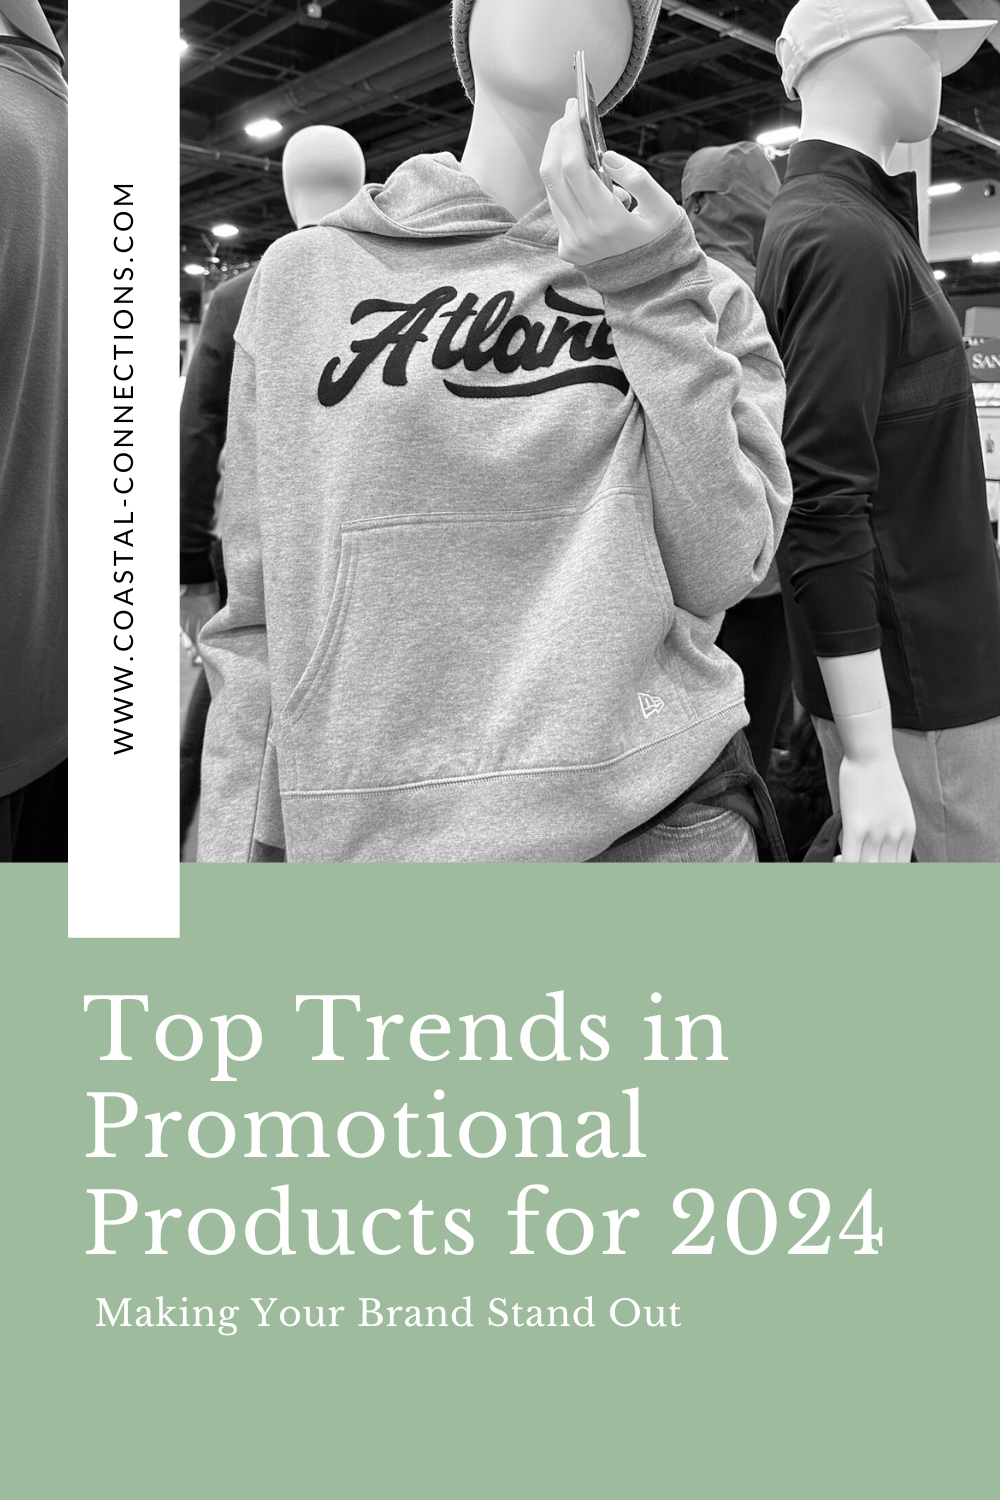 Top Trends in Promotional Products for 2024